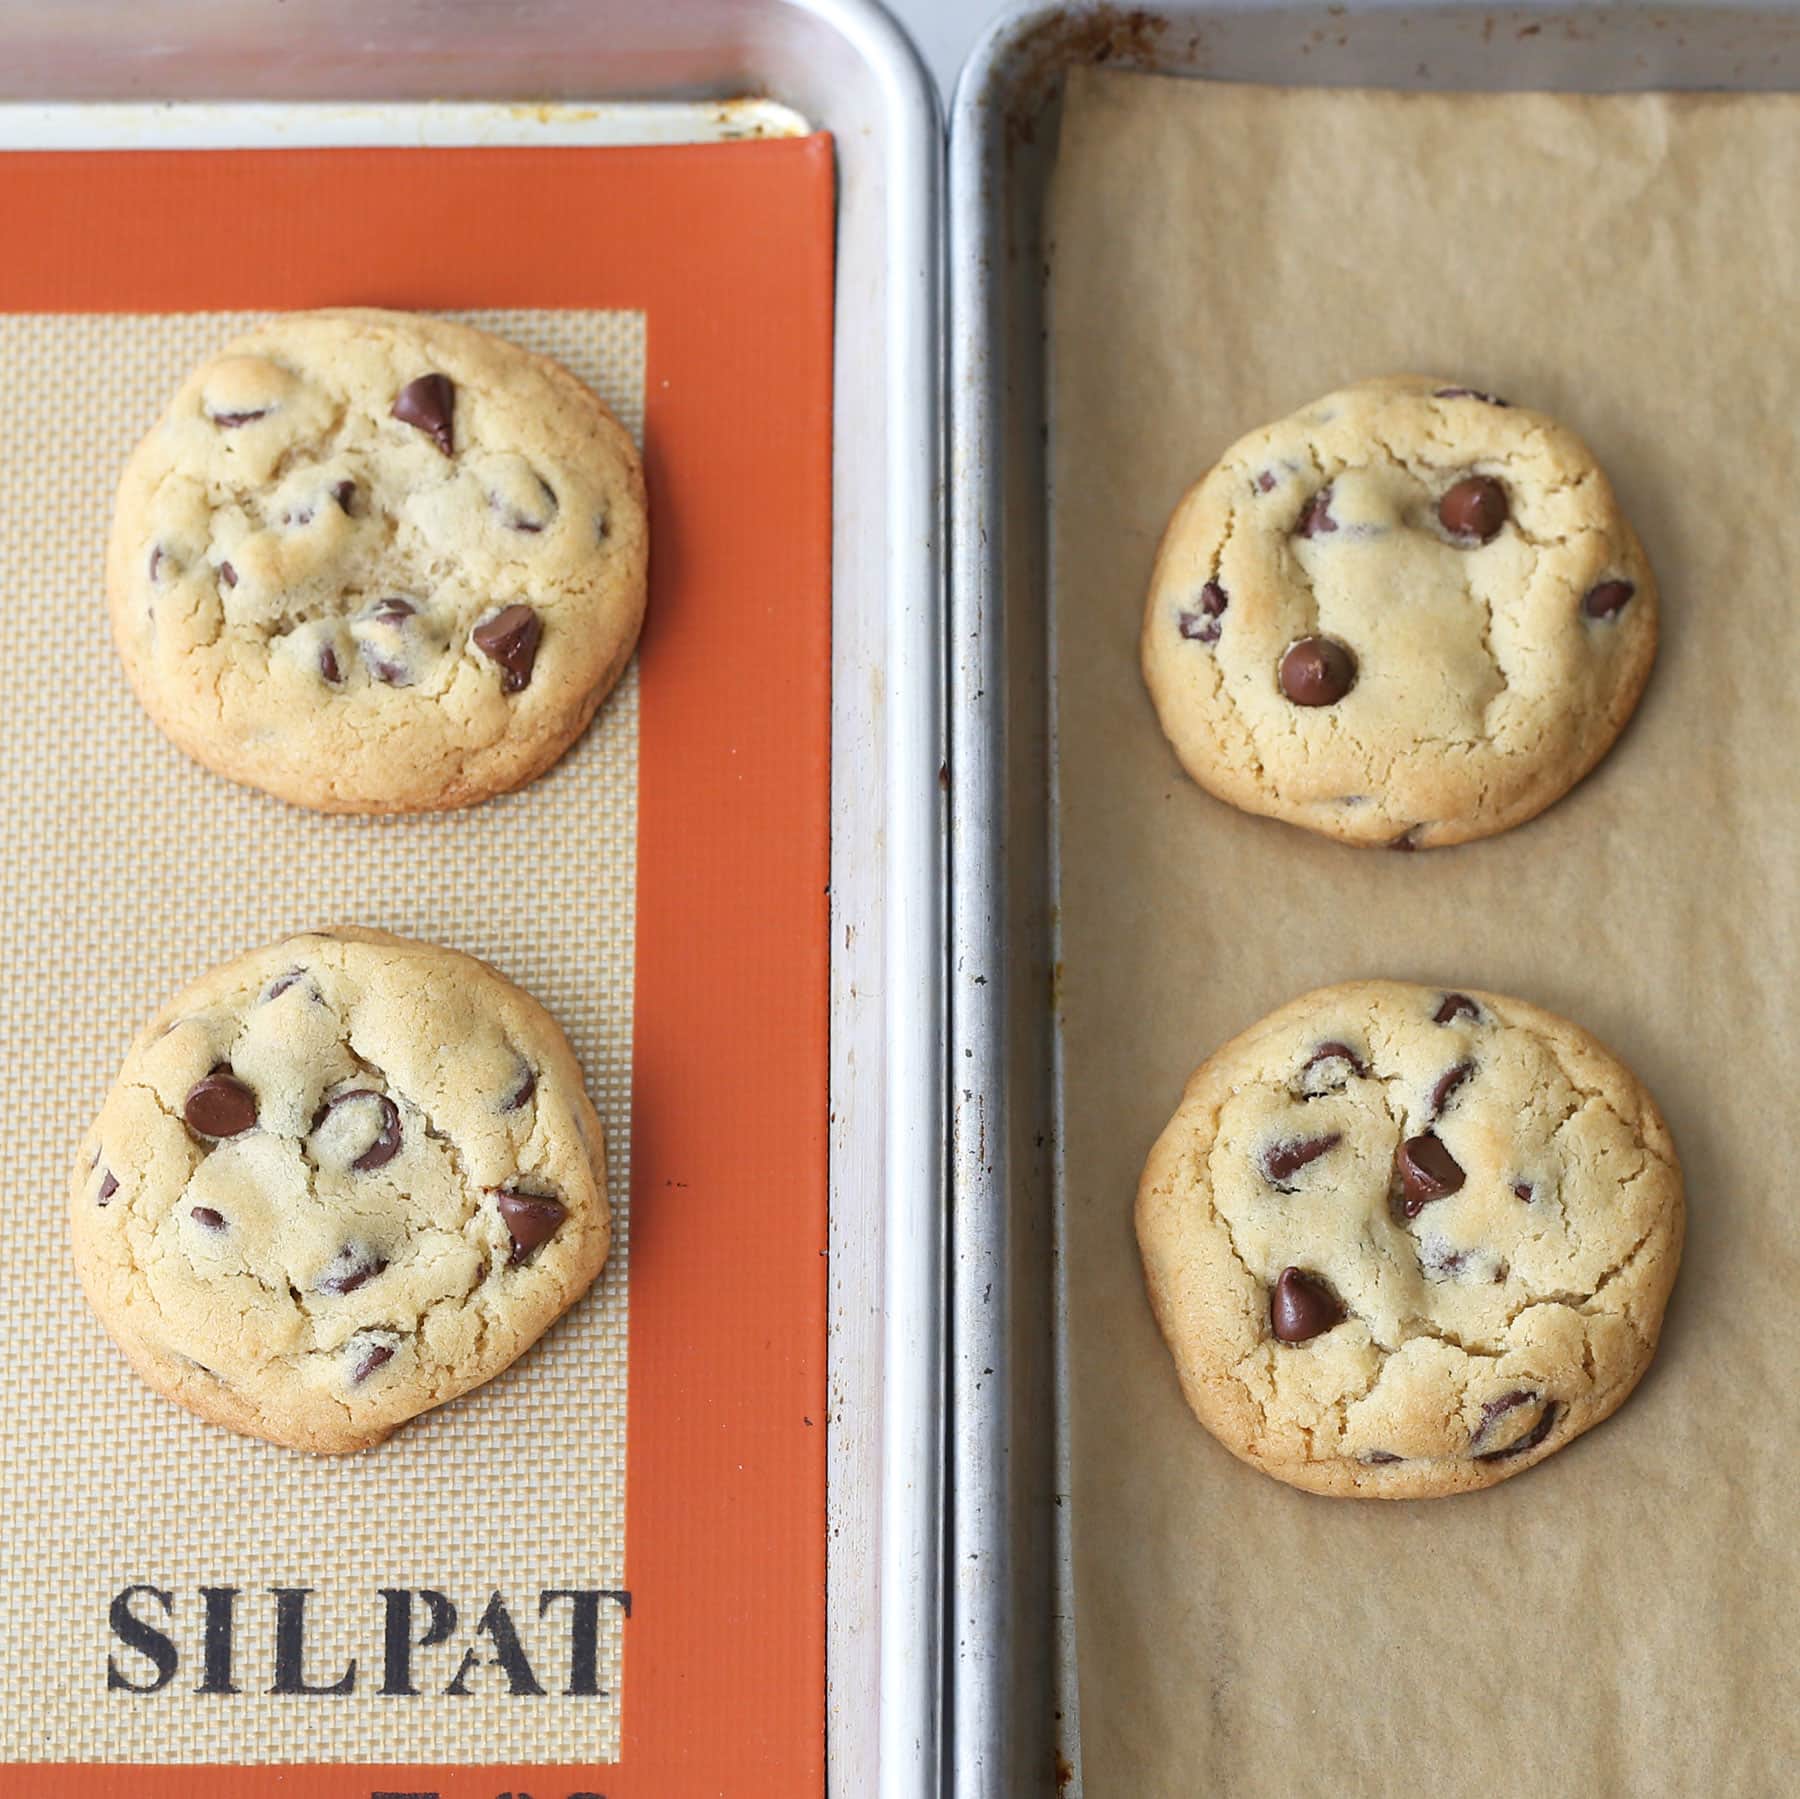 Chocolate chip cookies baked on a Silpat vs parchment paper to compare the differences